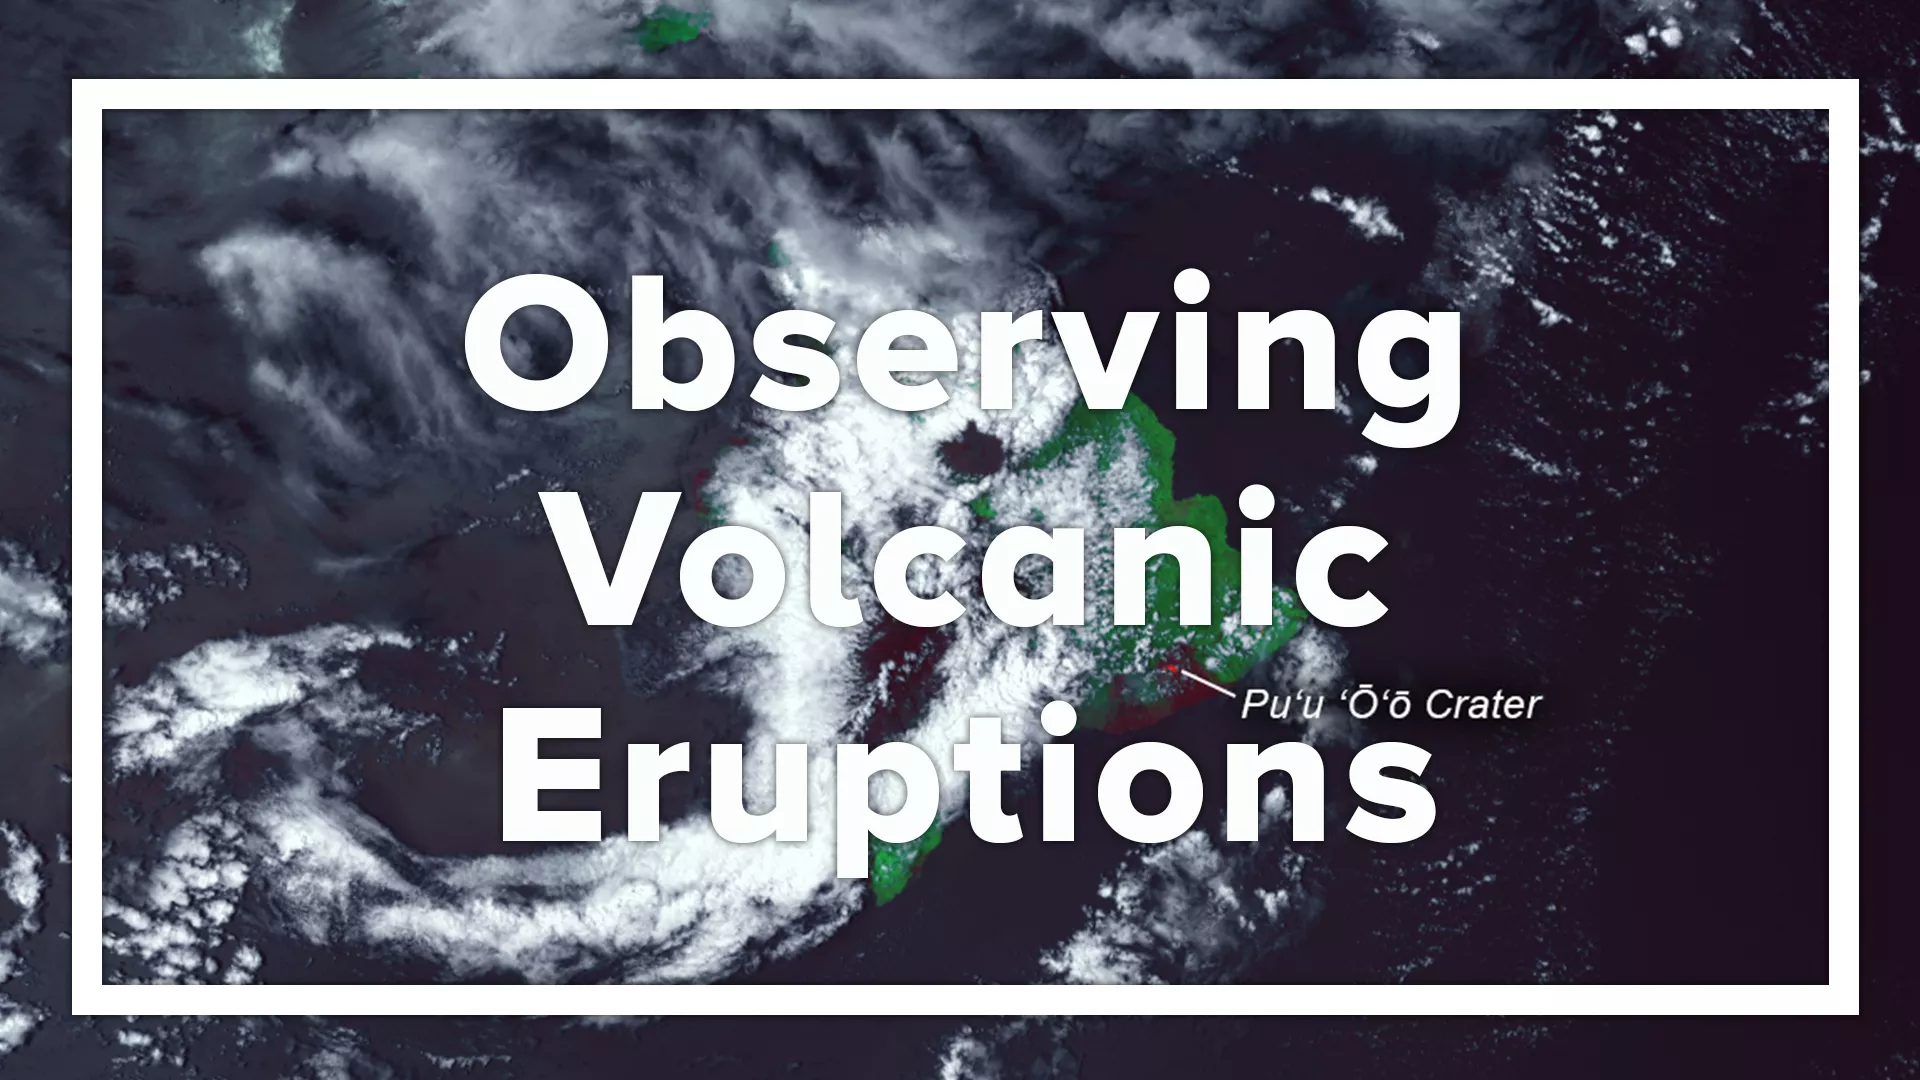 Image with text; Observing Volcanic Eruptions